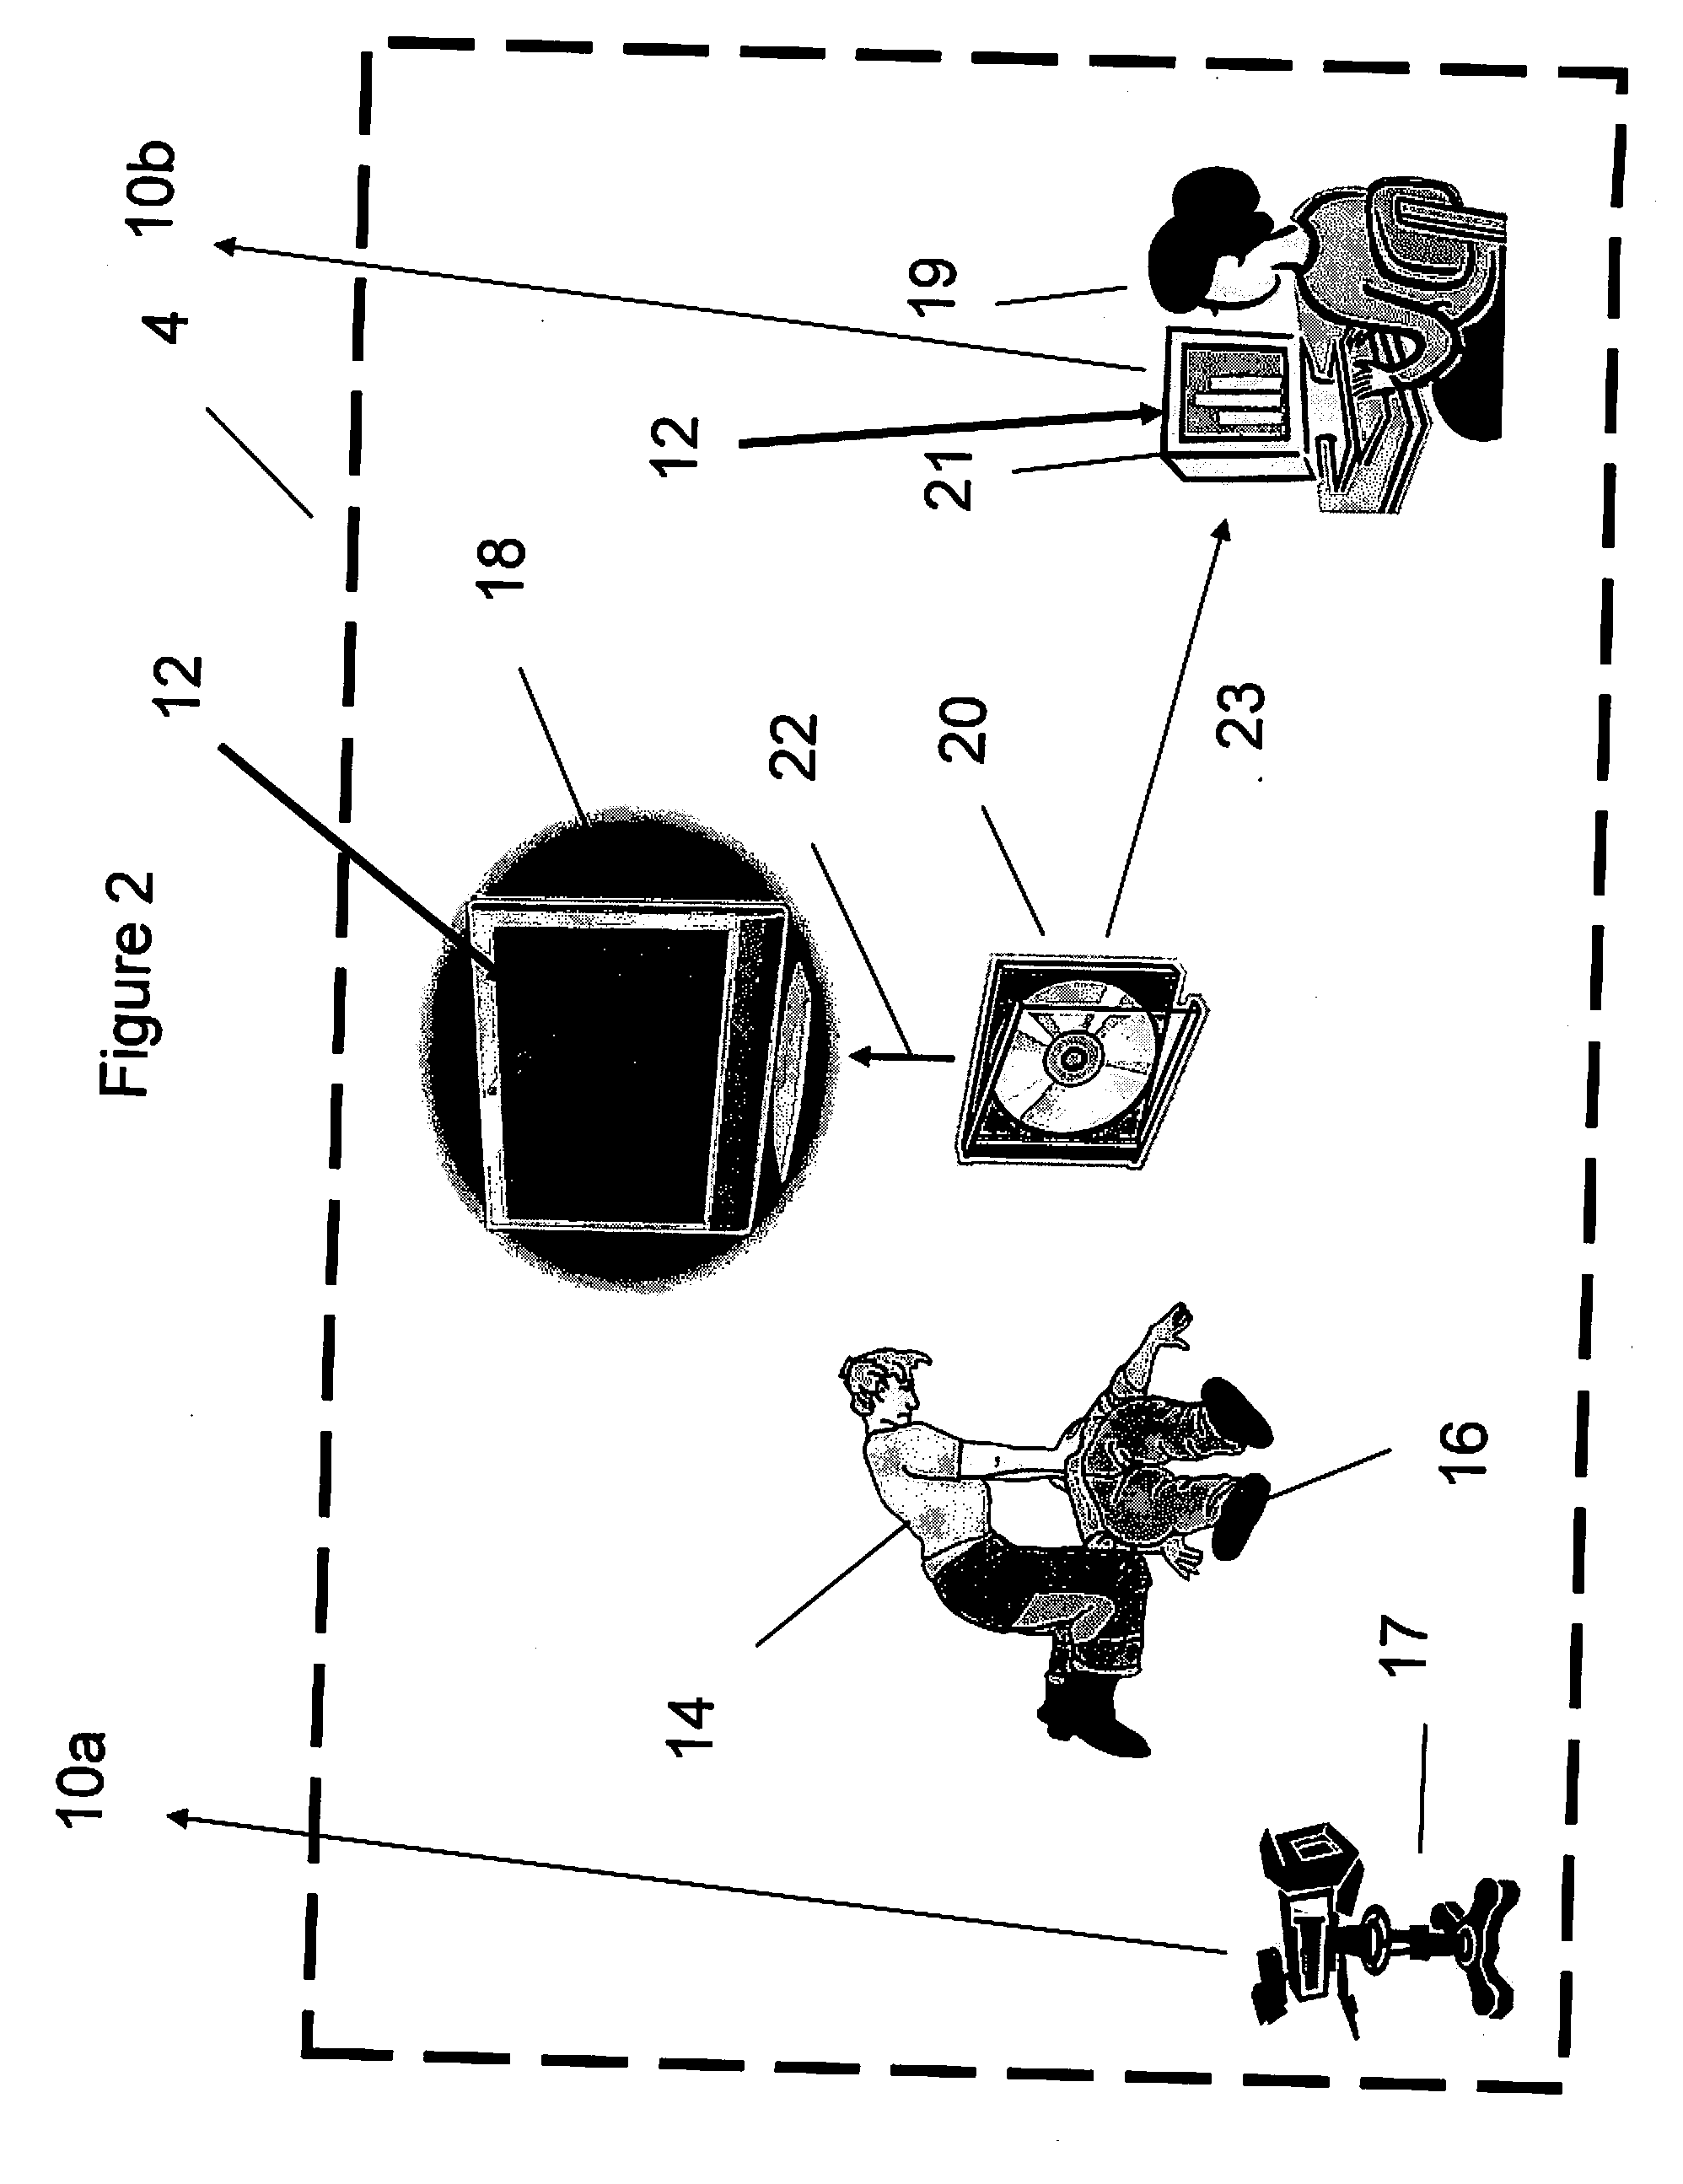 System and method for remote verification of training